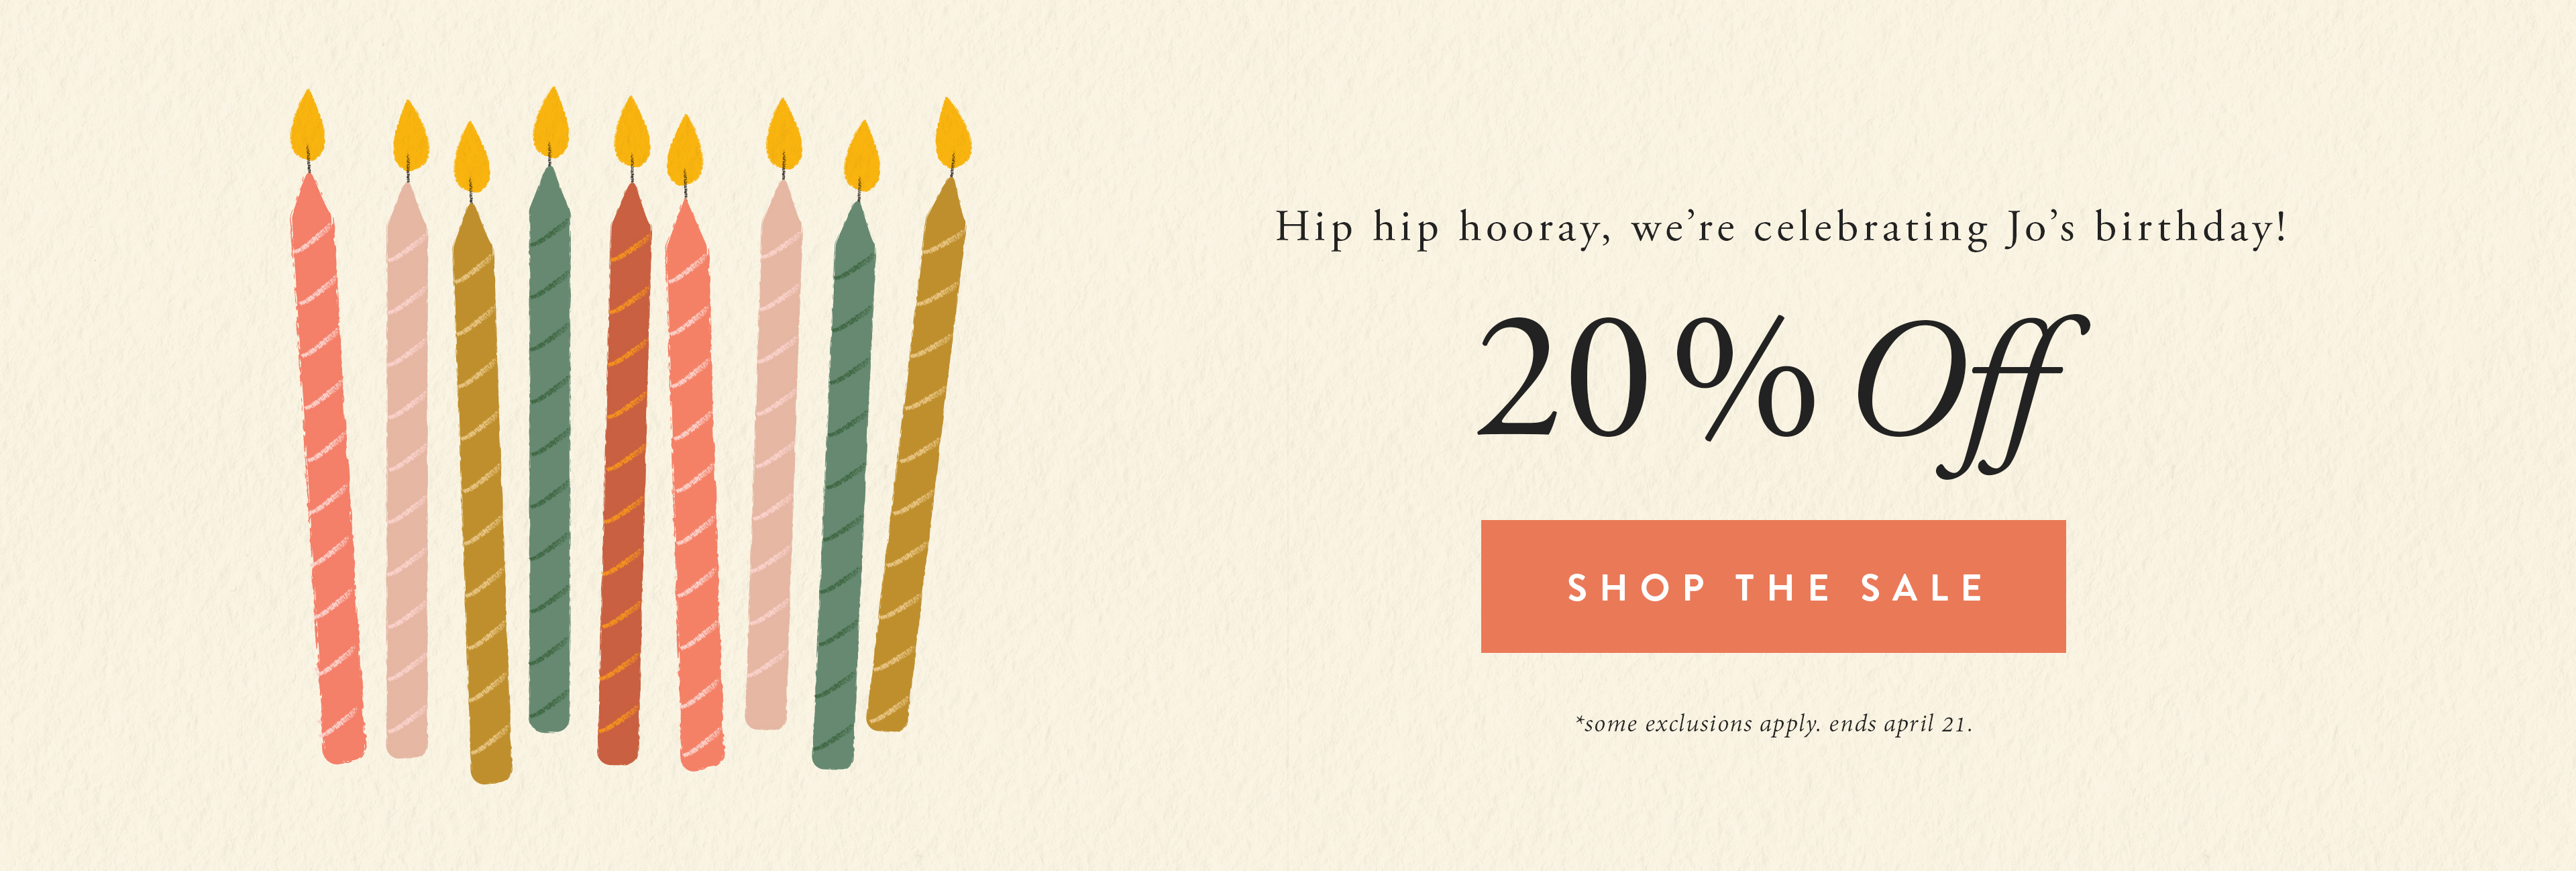 hip hip hooray, we're celebrating Jo's Birthday!  20% off.  shop the sale.  some exclusions apply.  